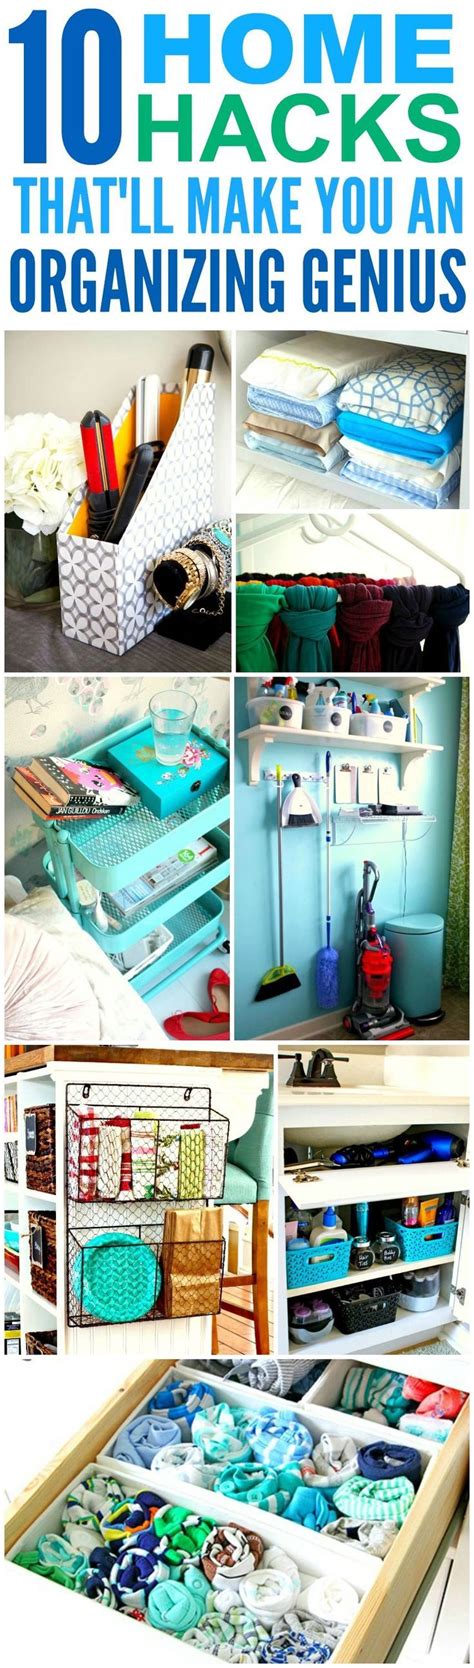 10 Home Hacks That Will Make You An Organizing Genius Home